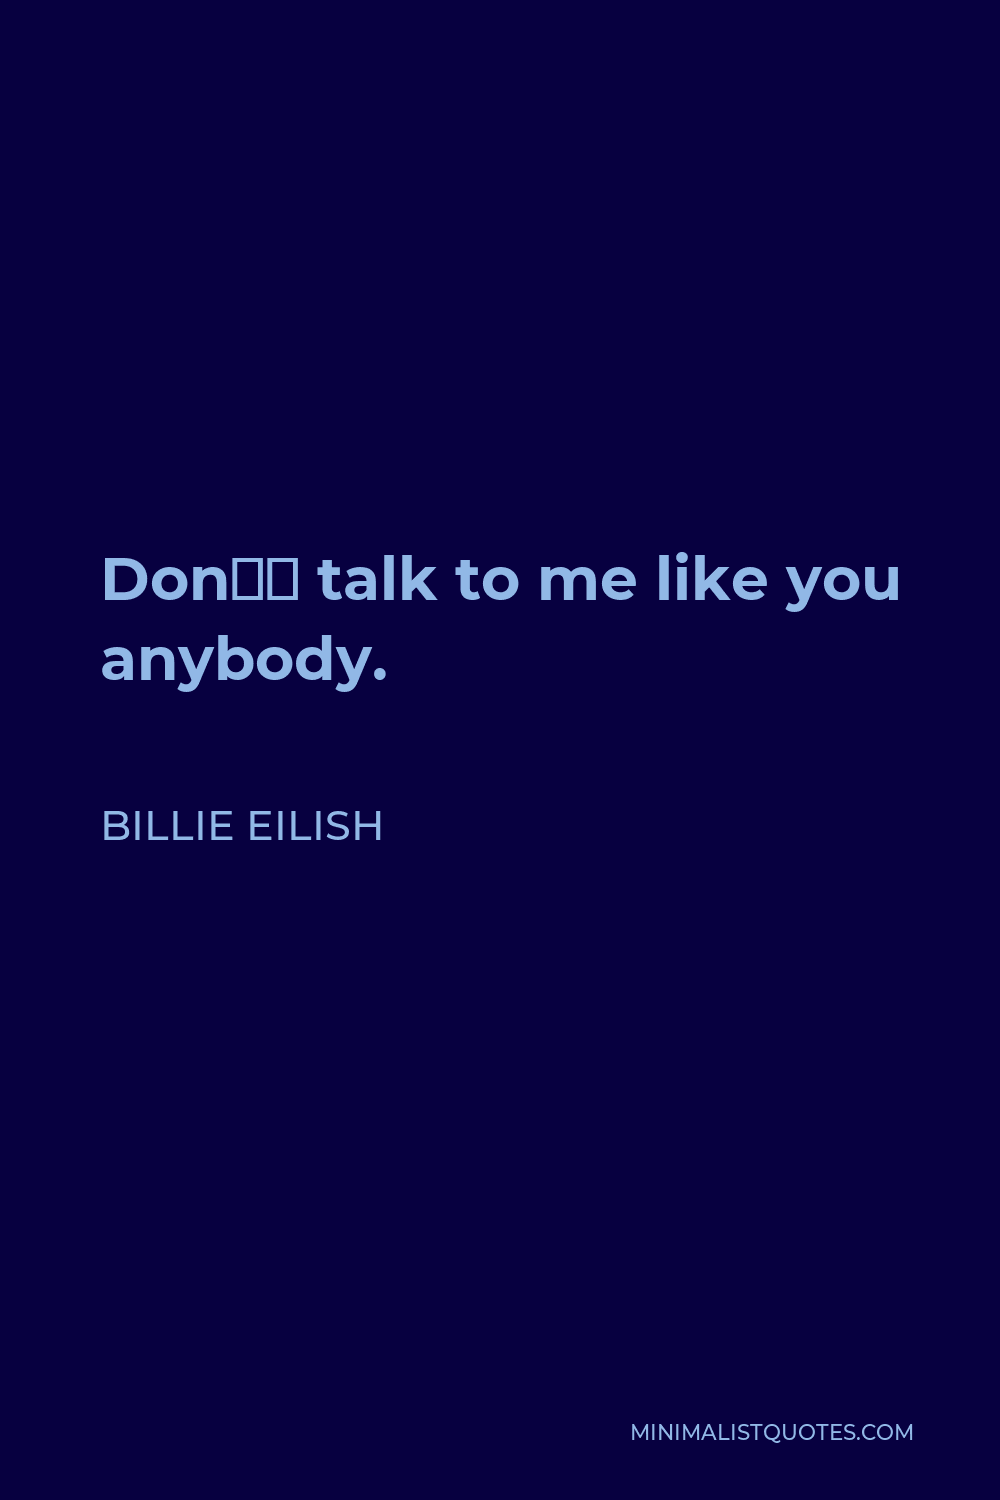 Billie Eilish Quote - Don’t talk to me like you anybody.